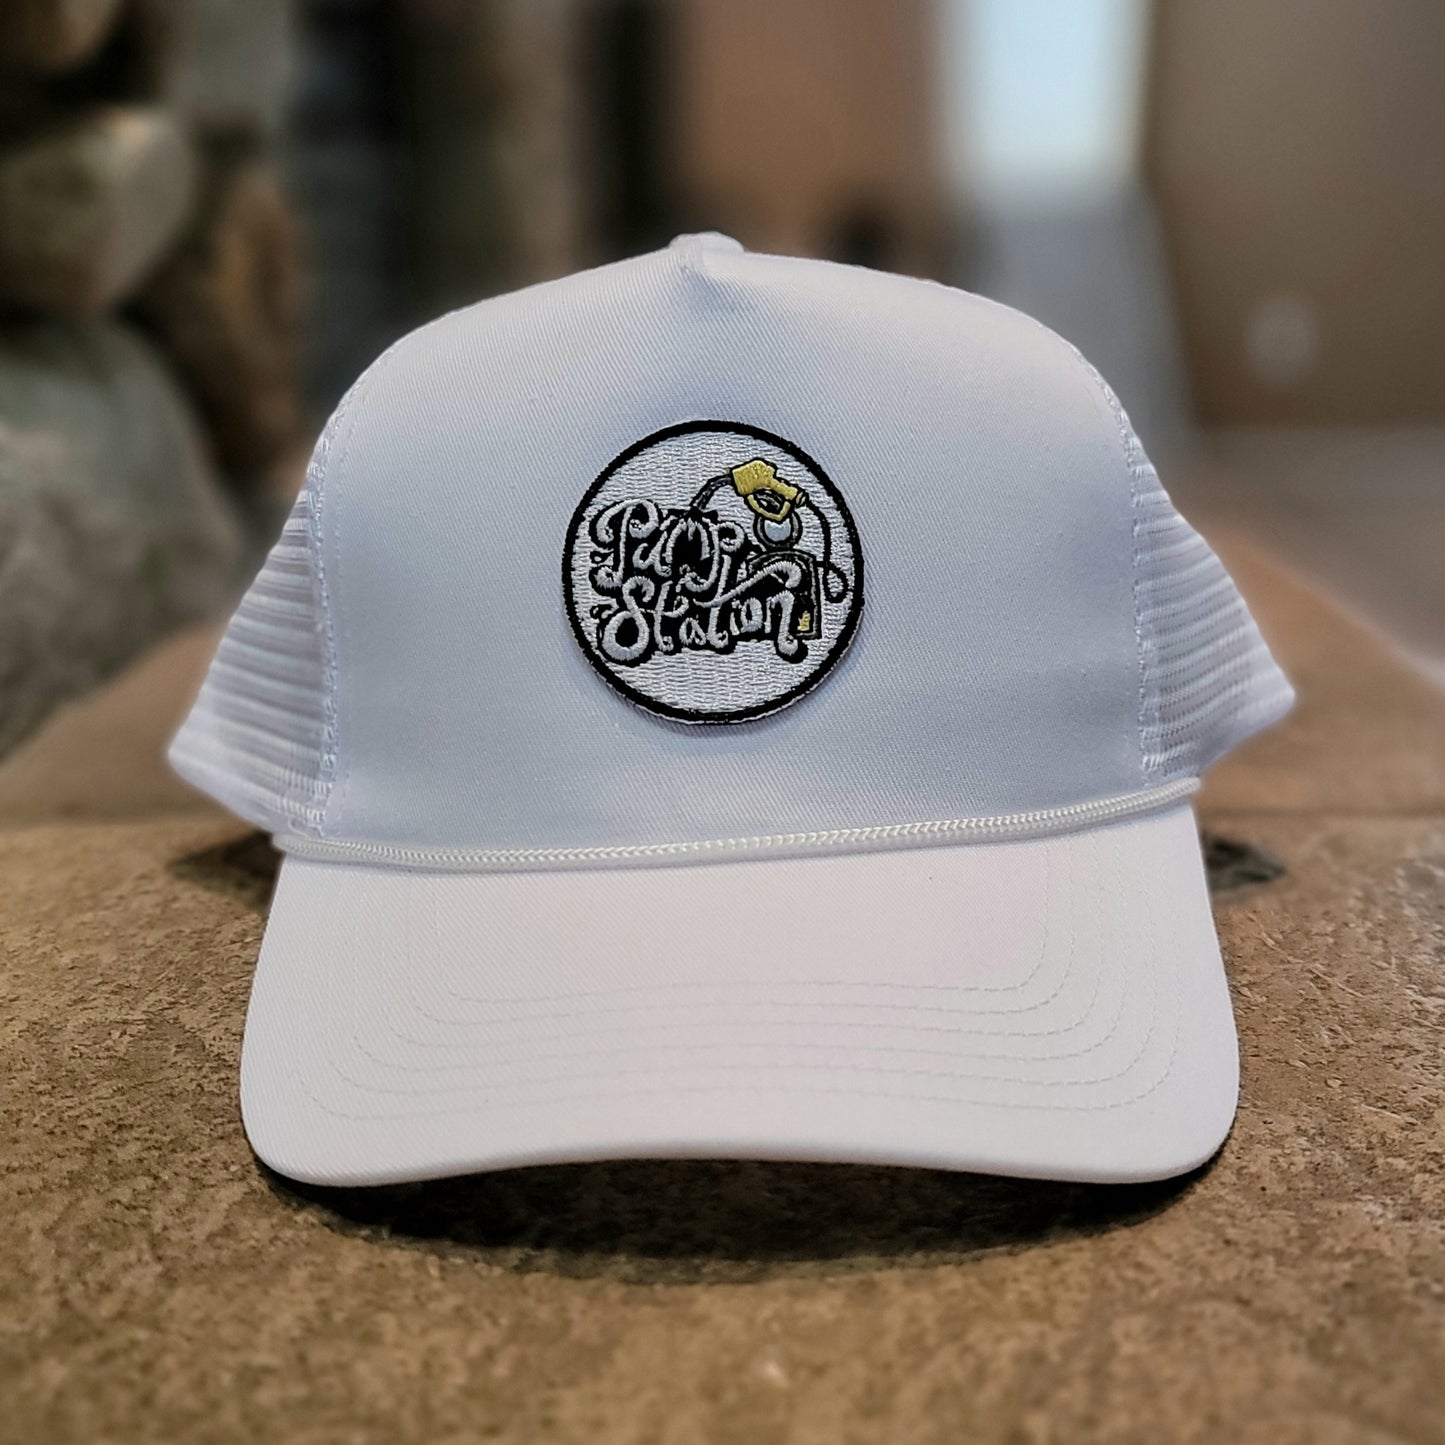 Pump Station Patch Hat - White